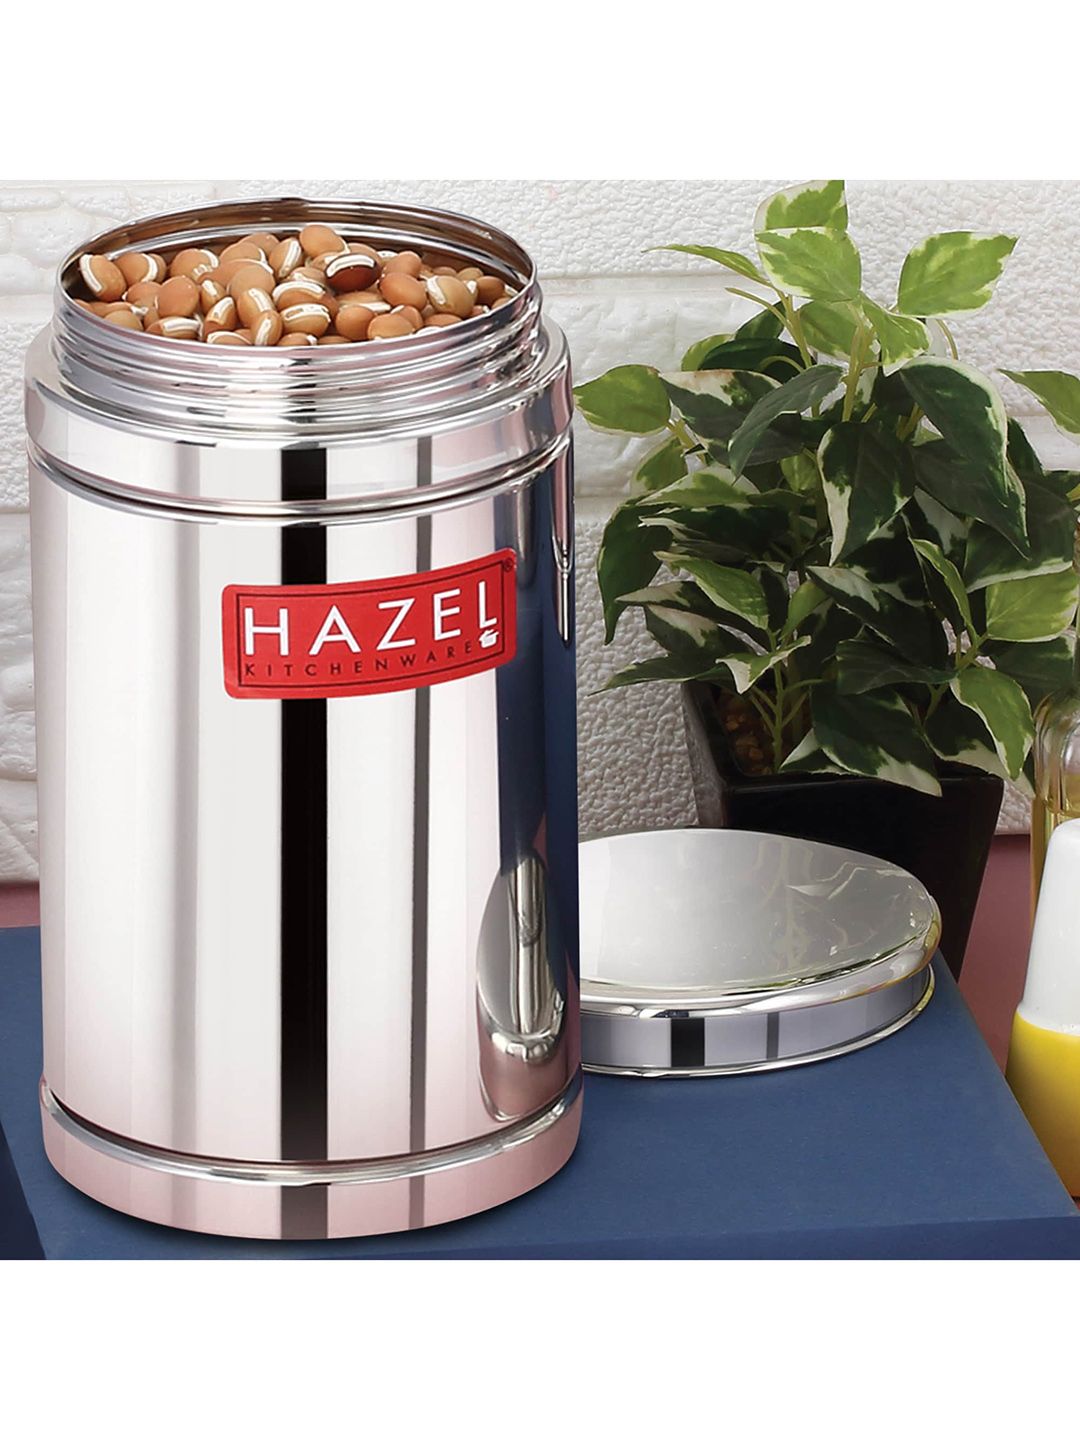 HAZEL Silver-Colored Solid Cylindrical Kitchen Storage Price in India